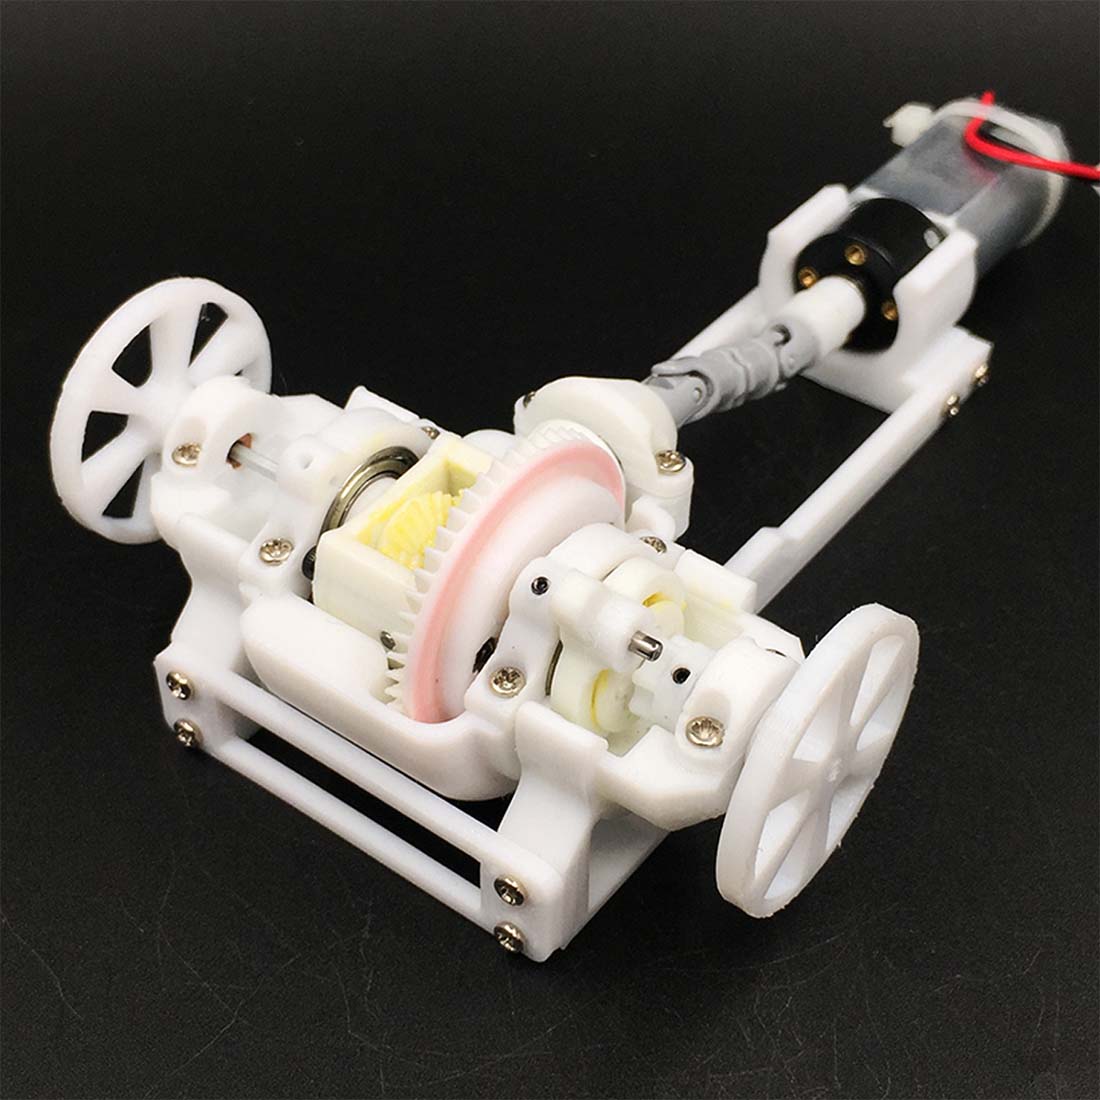 Functional 3D Printed Open Differential Model